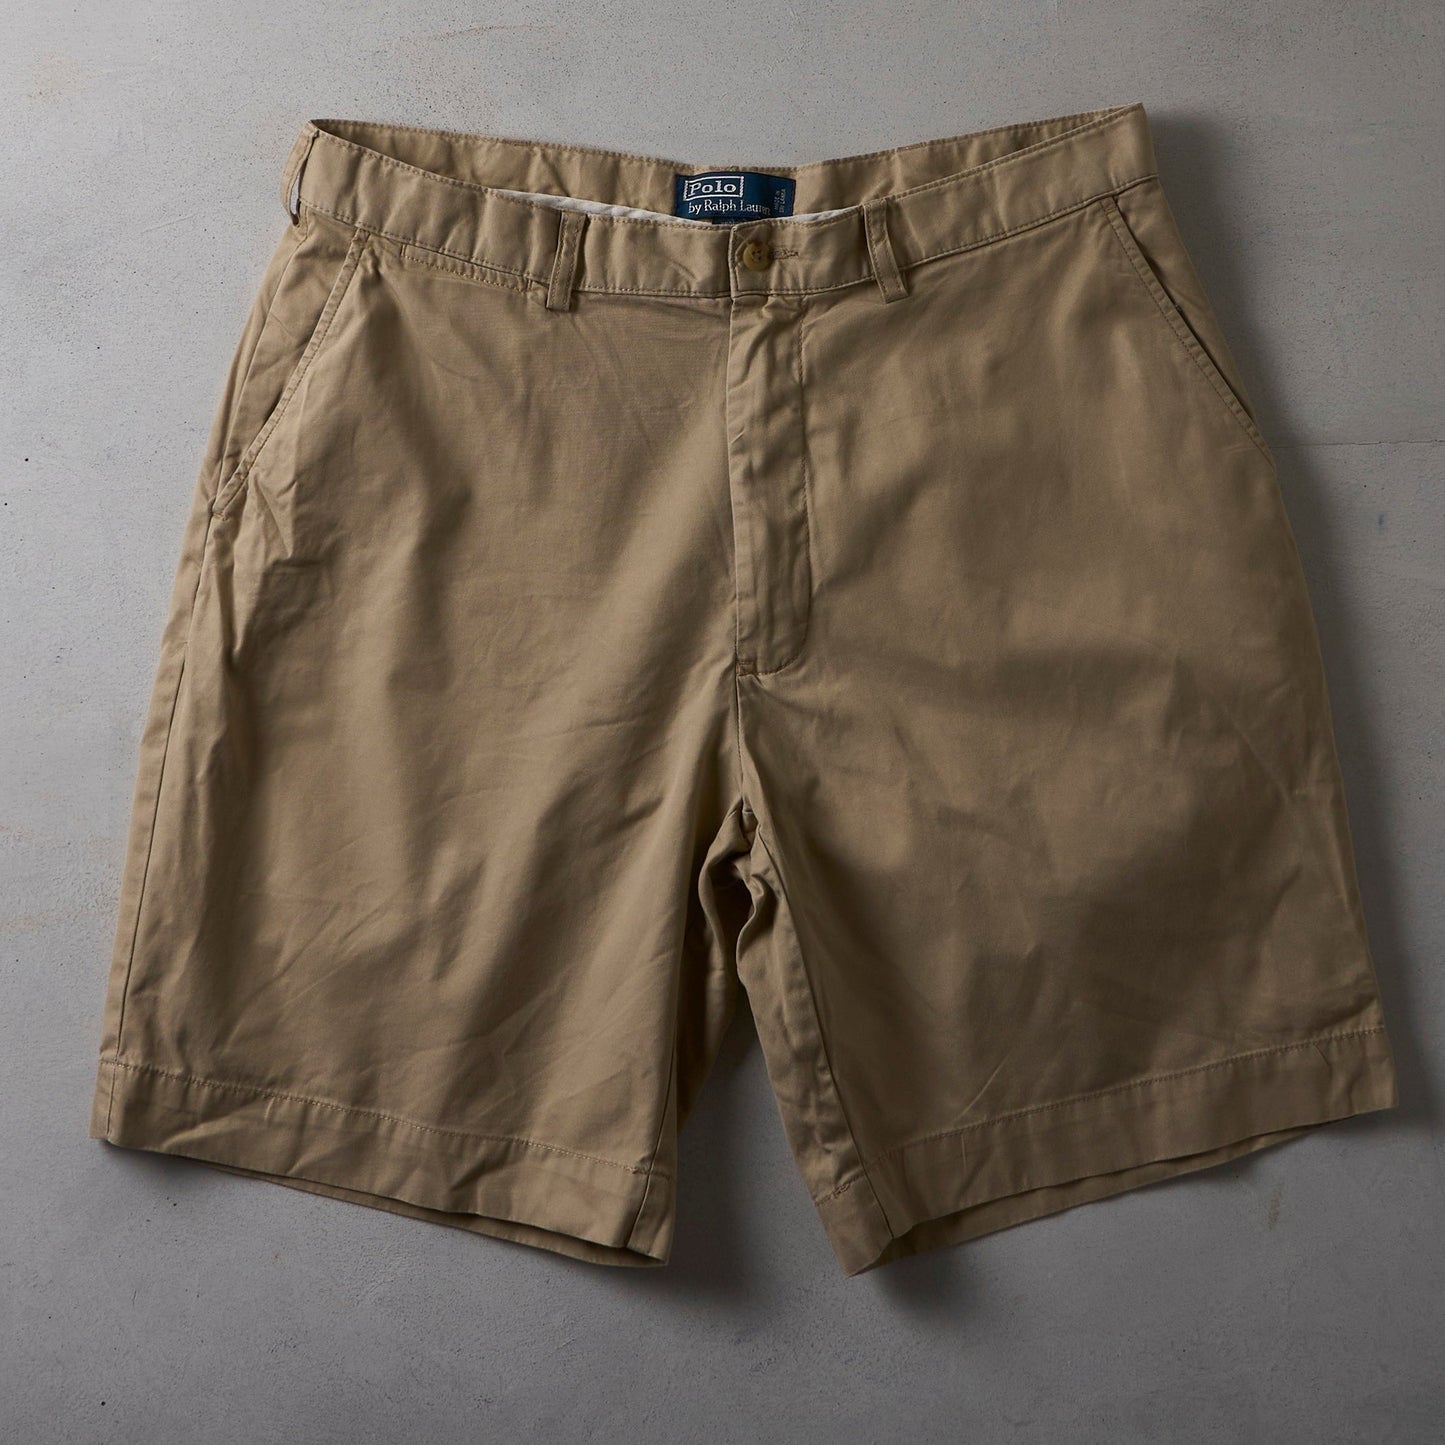 Vintage Polo by Ralph Lauren Shorts